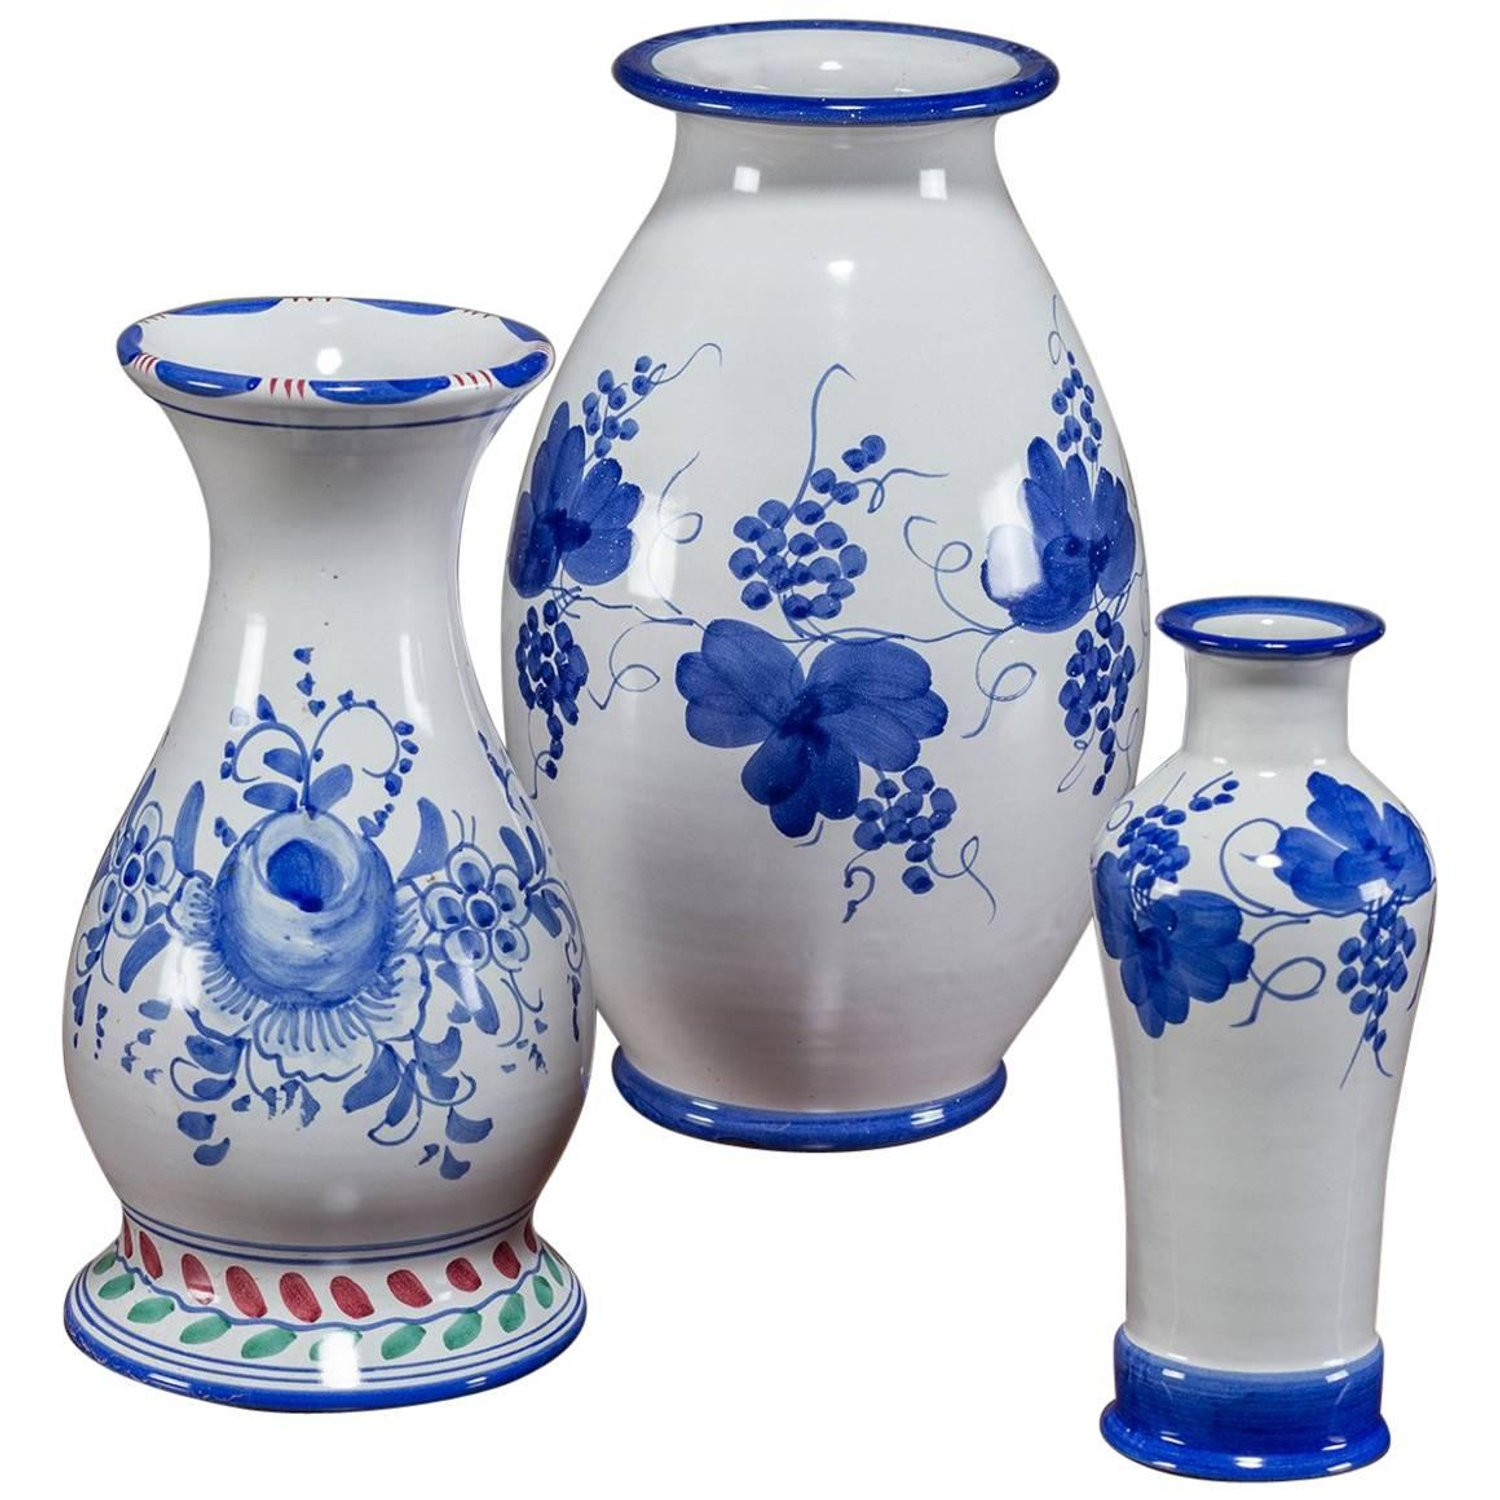 23 Amazing Blue John Vases for Sale 2024 free download blue john vases for sale of vintage collection of blue and white willow for sale at 1stdibs with 9438093 master